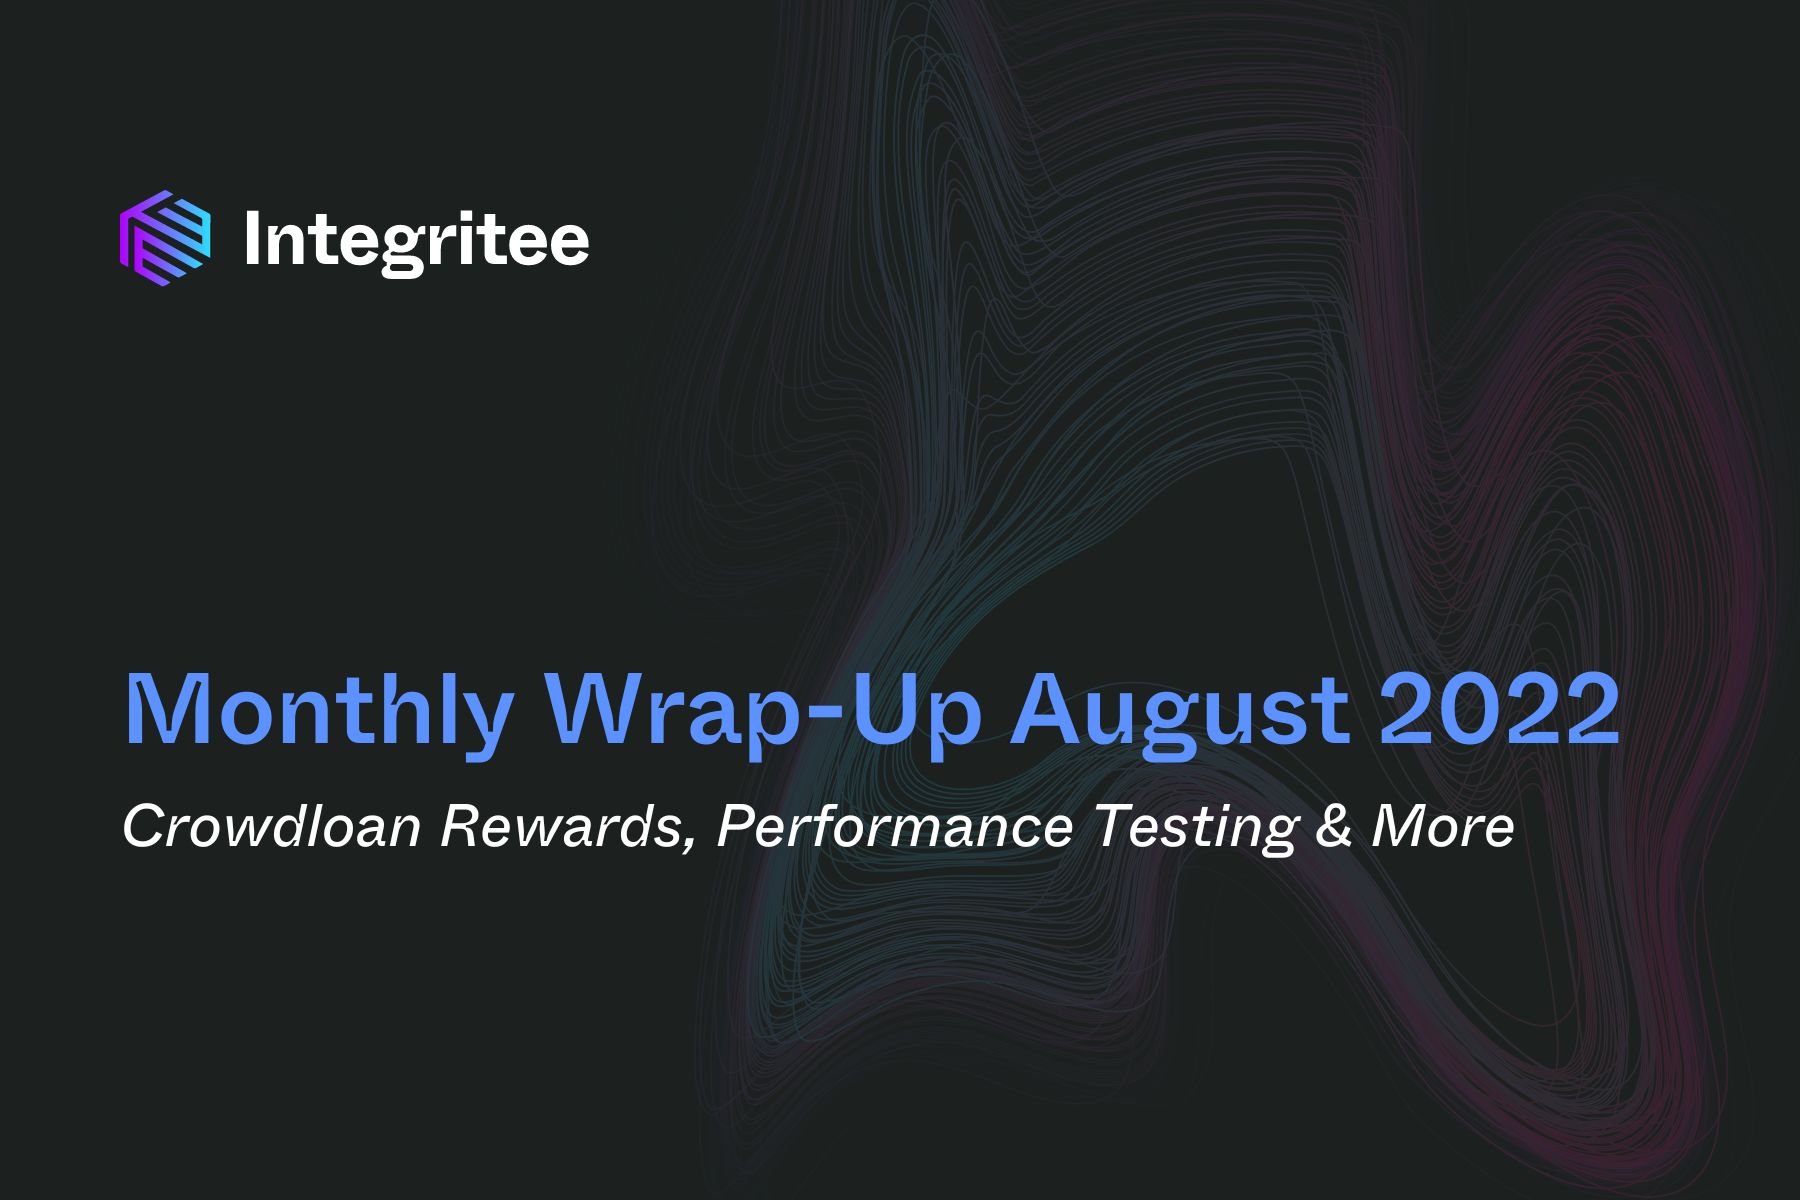 Monthly Wrap-Up August 2022